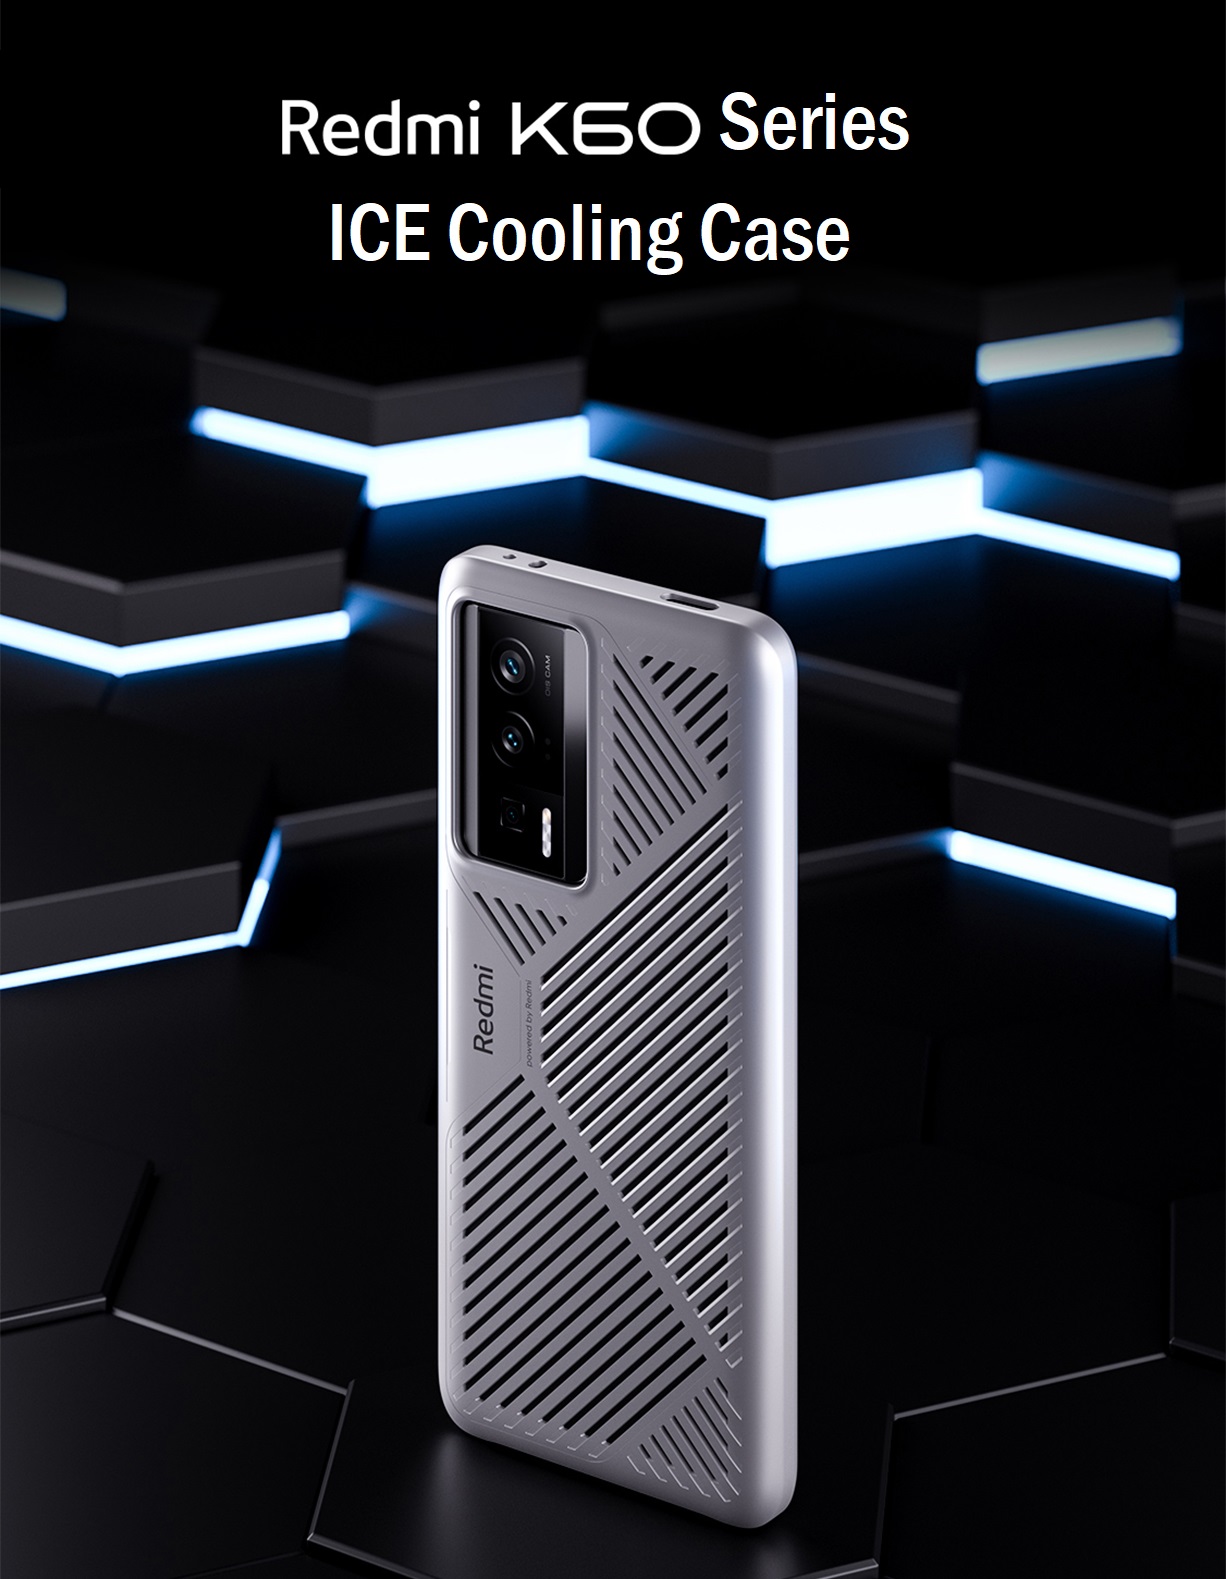 Official ICE Cooling Protective Case for Redmi K60 Series